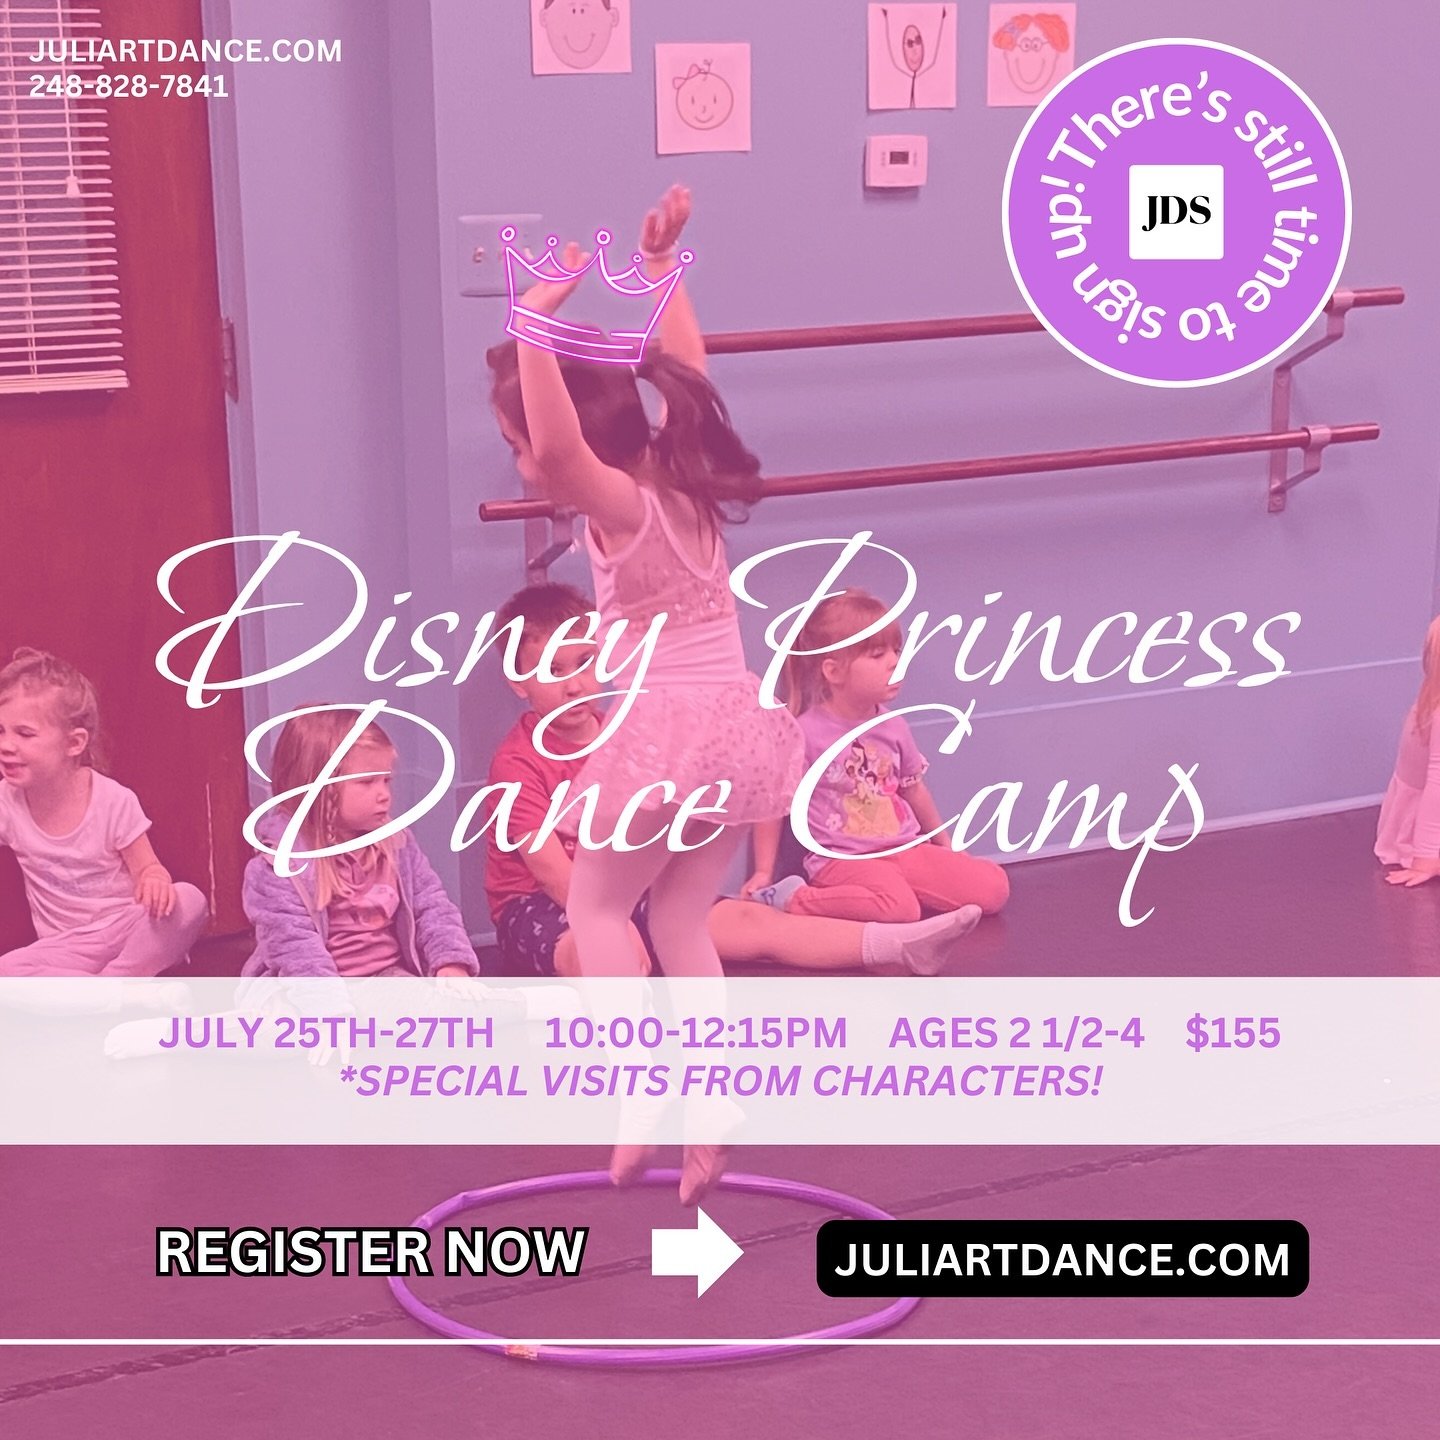 It&rsquo;s not too late to sign up for our Disney Princess Dance Camp! 👸🏼👑✨ It&rsquo;s going to be SO magical &amp; fun! 

REGISTER NOW on juliartdance.com 🩵
&bull;
&bull;
&bull;
#juliartdancestudio #juliartdance #dancecamp #disney #disneyprinces